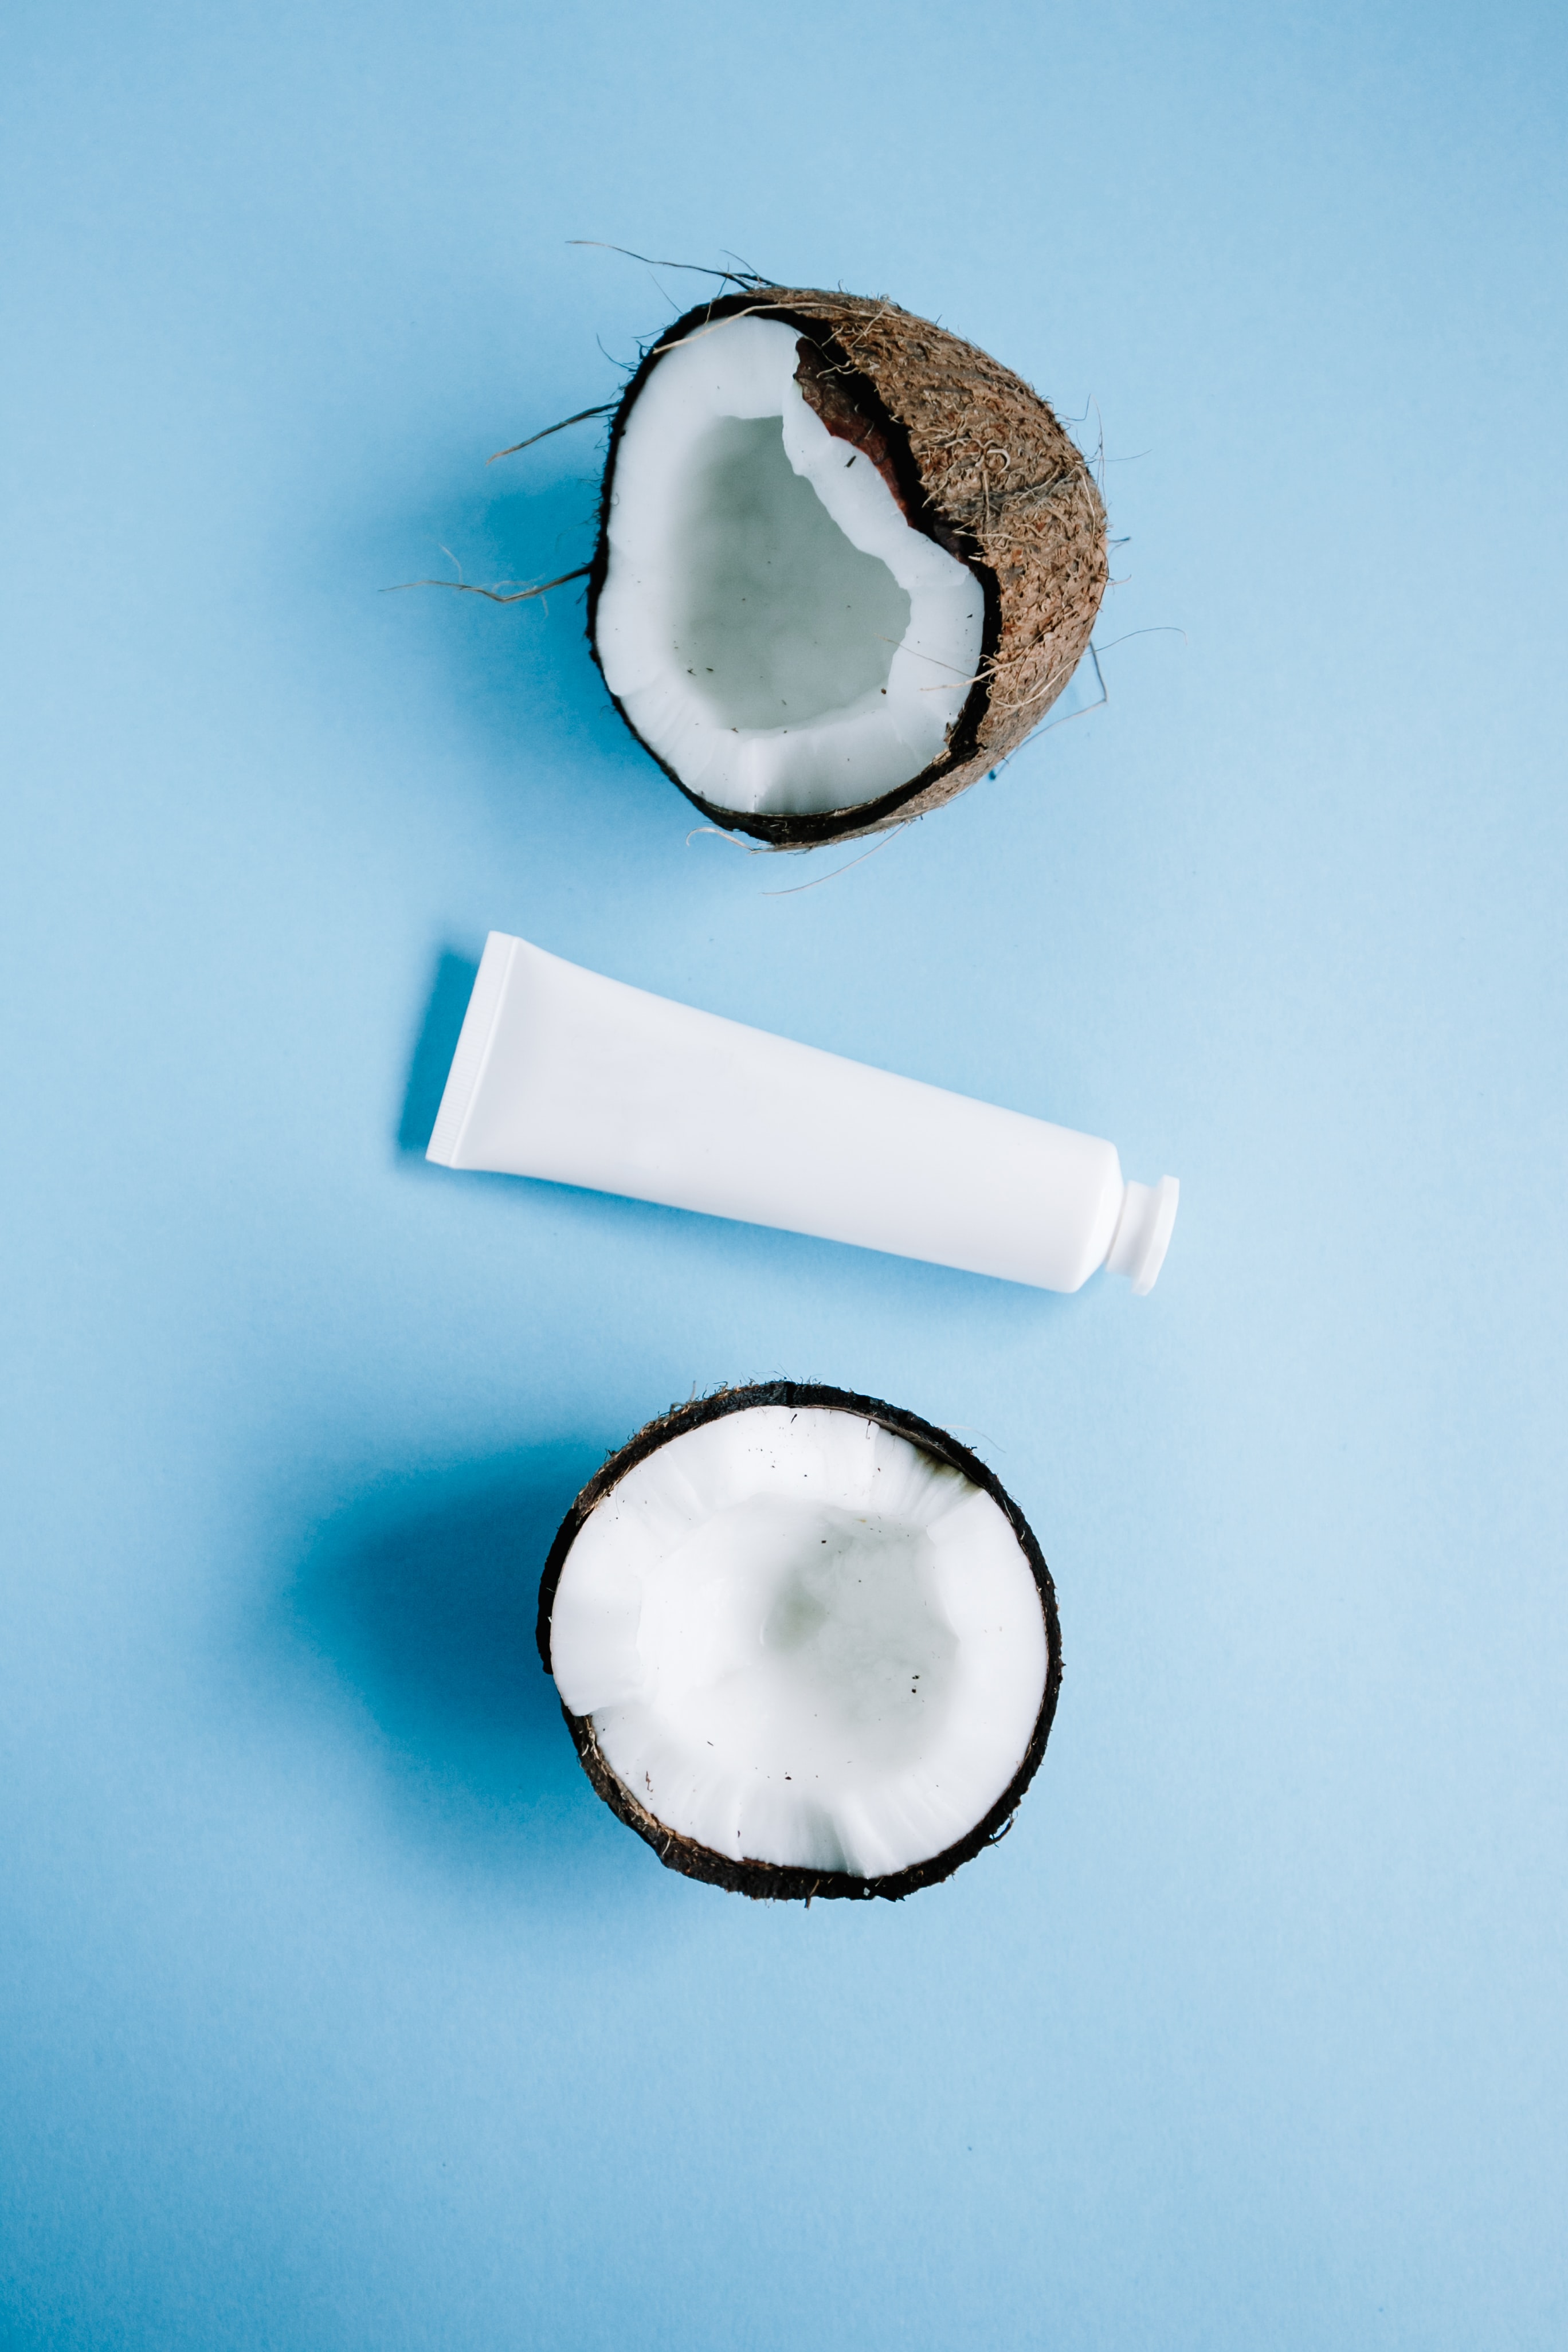 Coconut based Cosmetic, popular in the Maldives